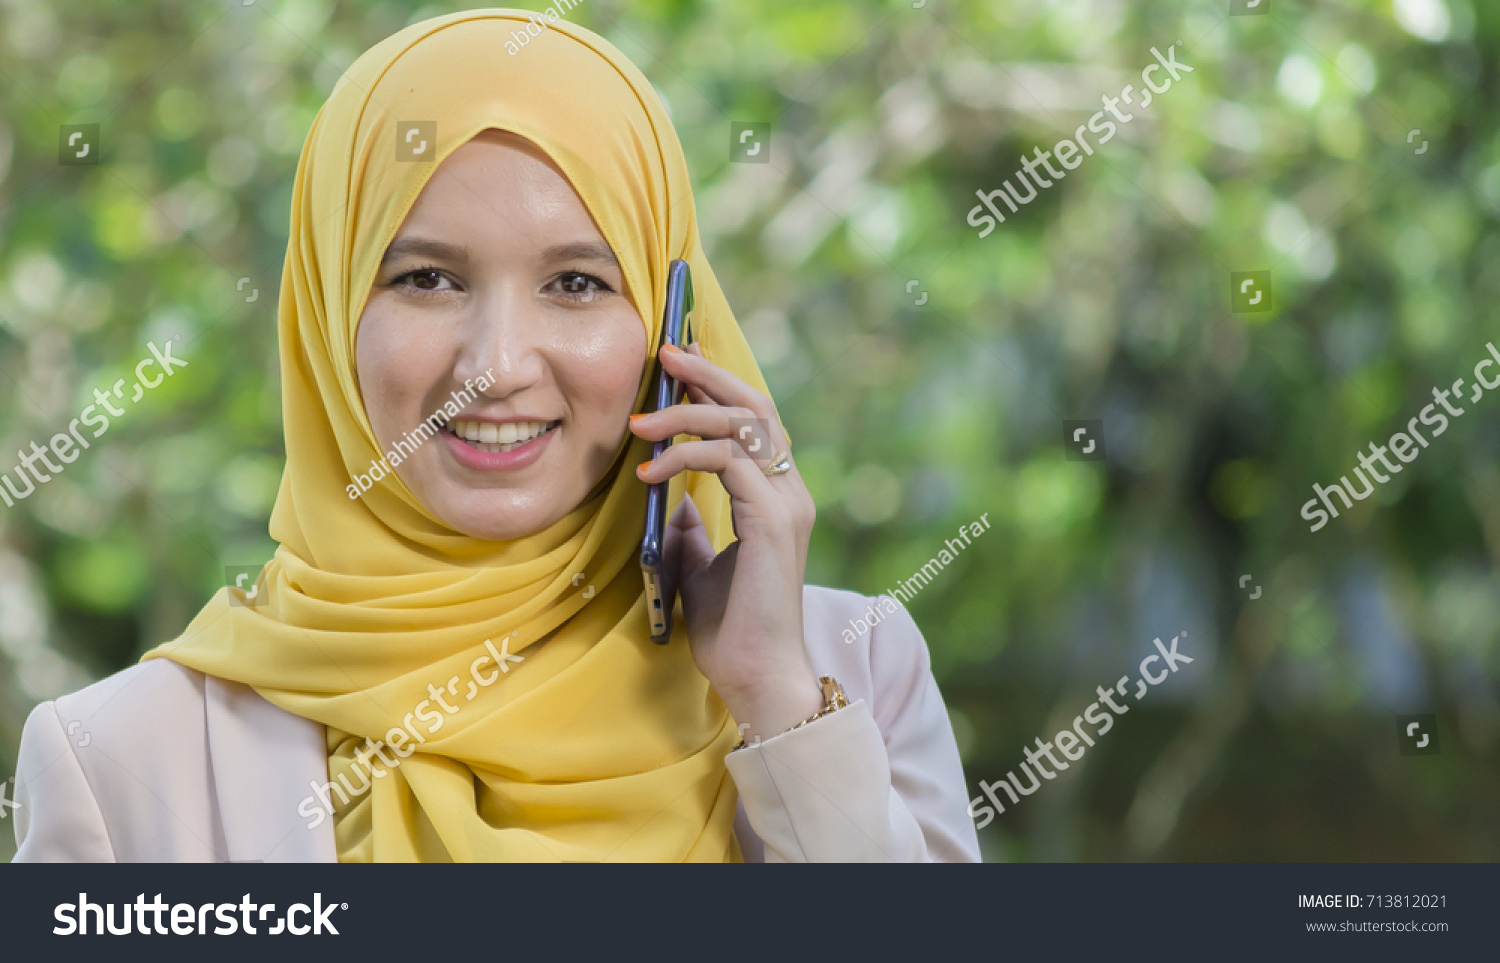 Businesswoman in hijab in the park talking on cell phone. #713812021